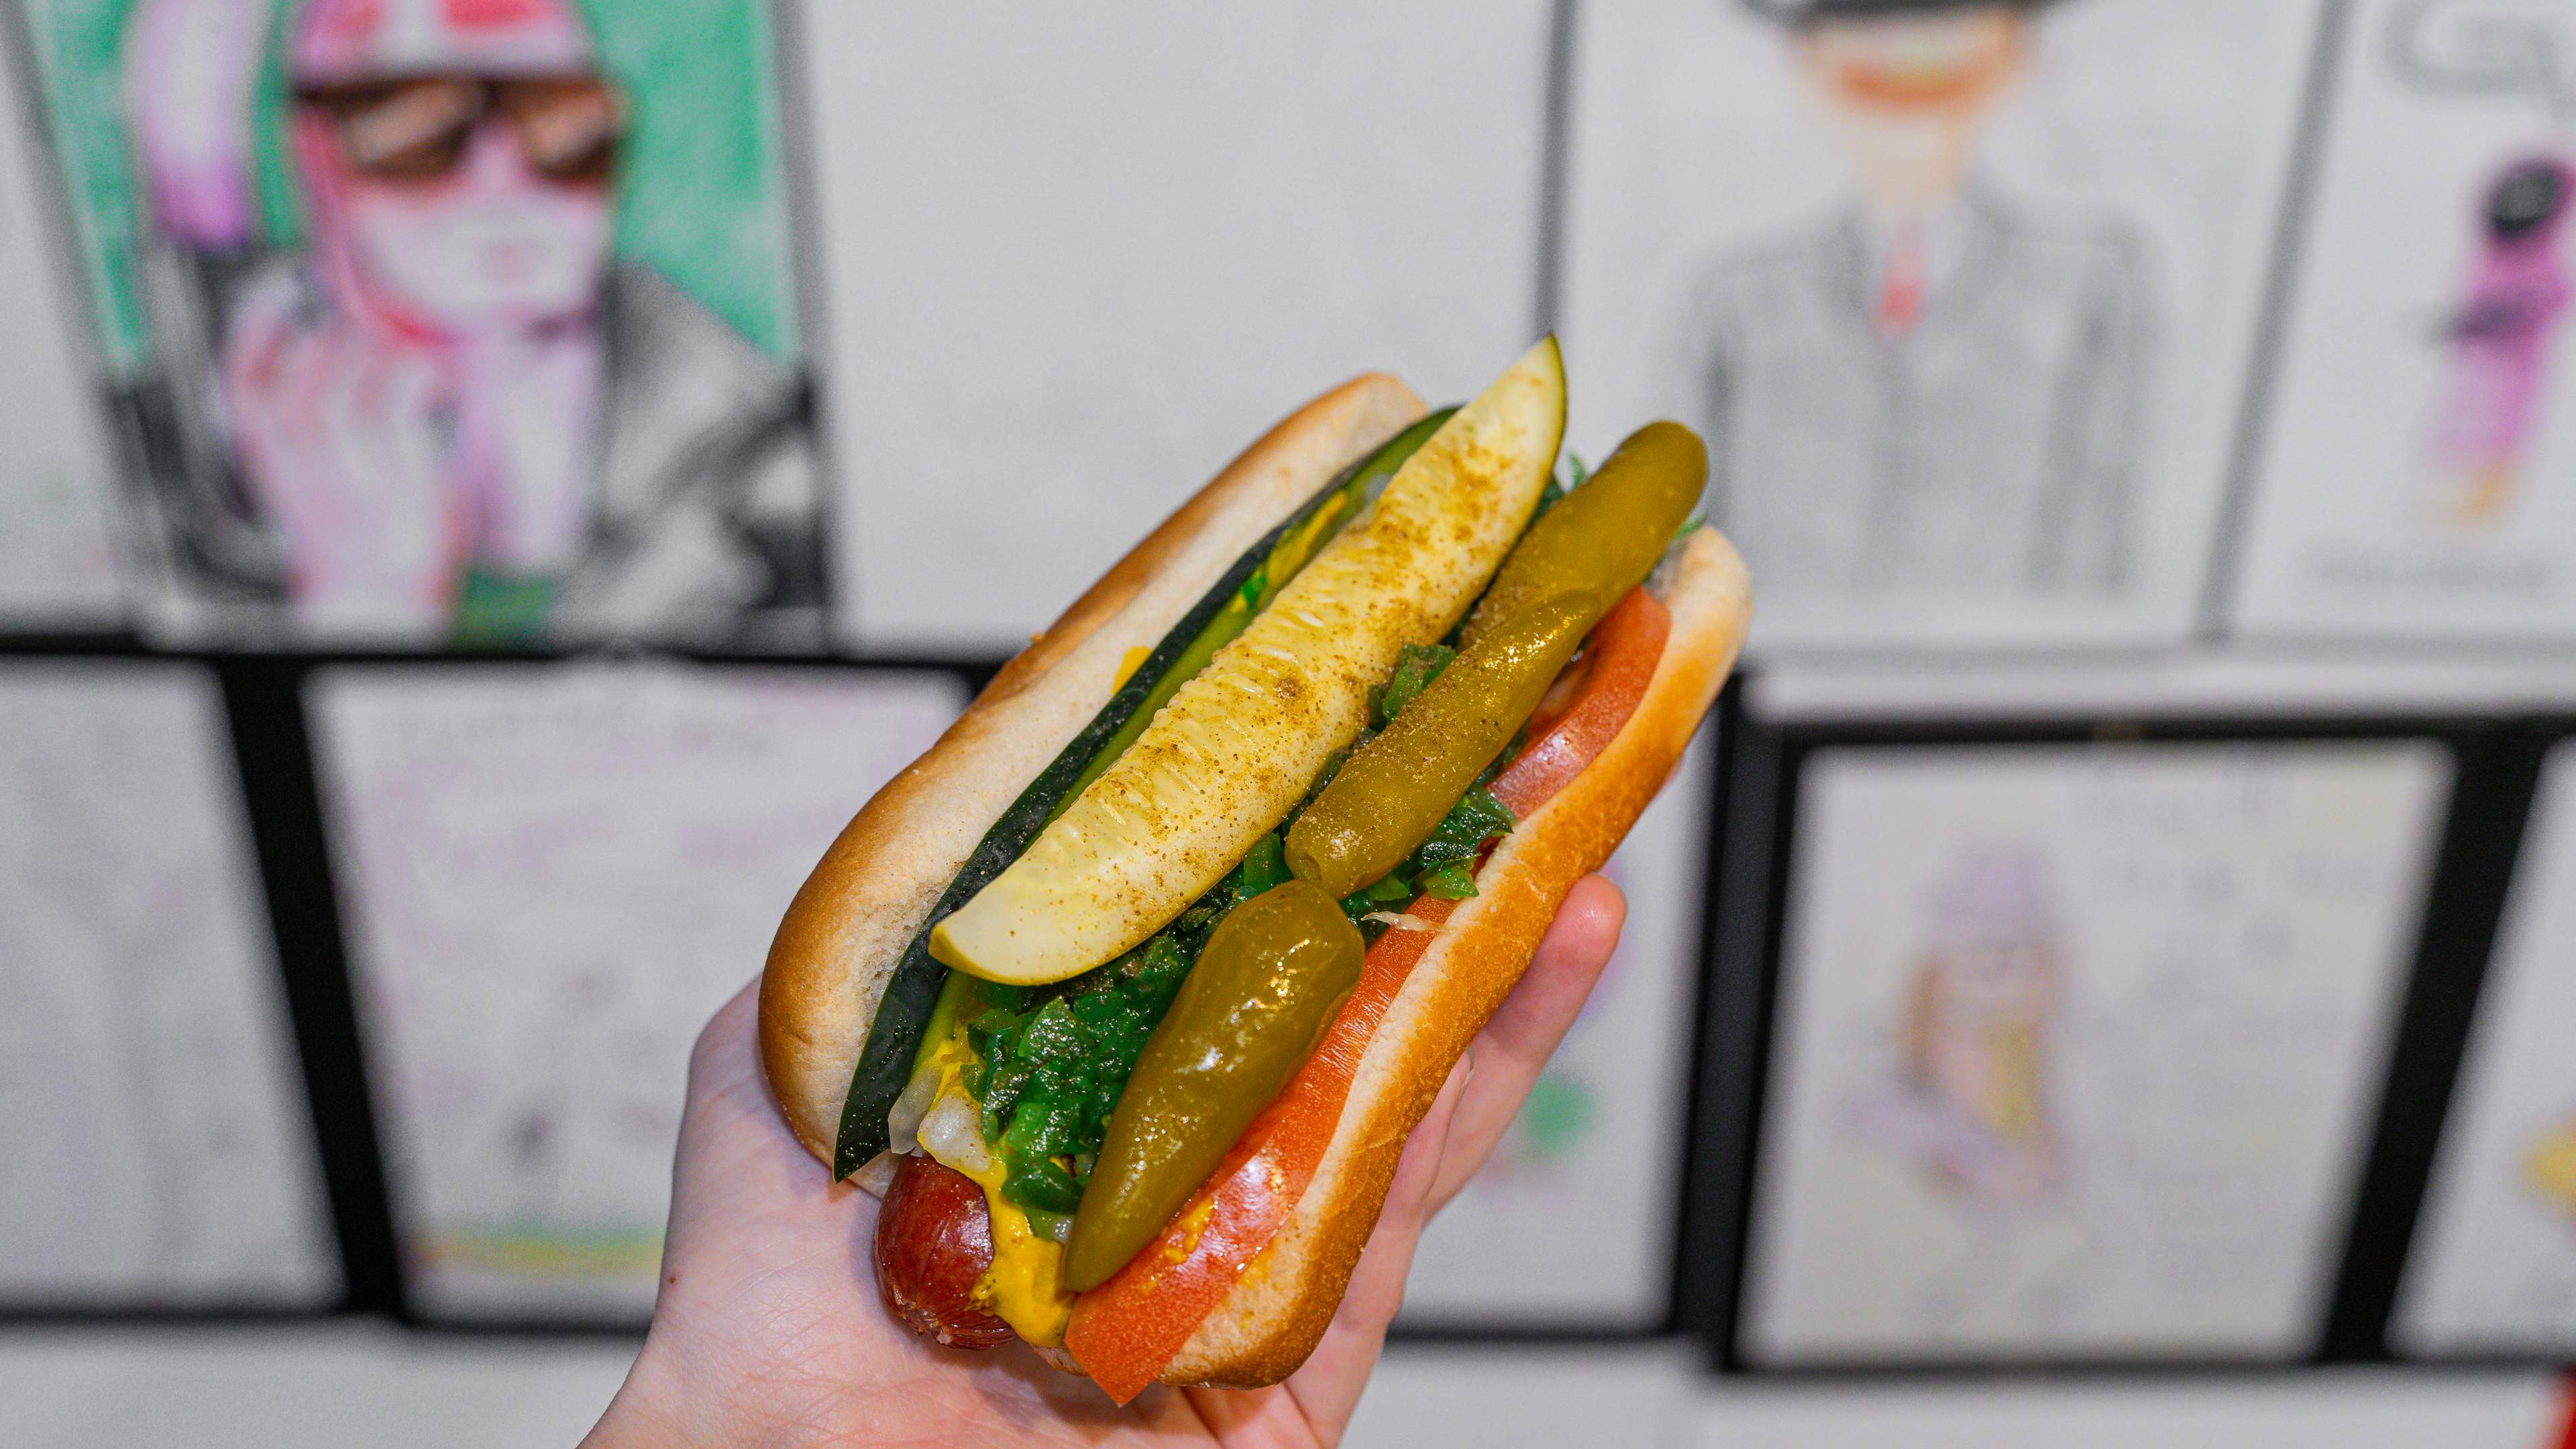 Chicago dog being held up